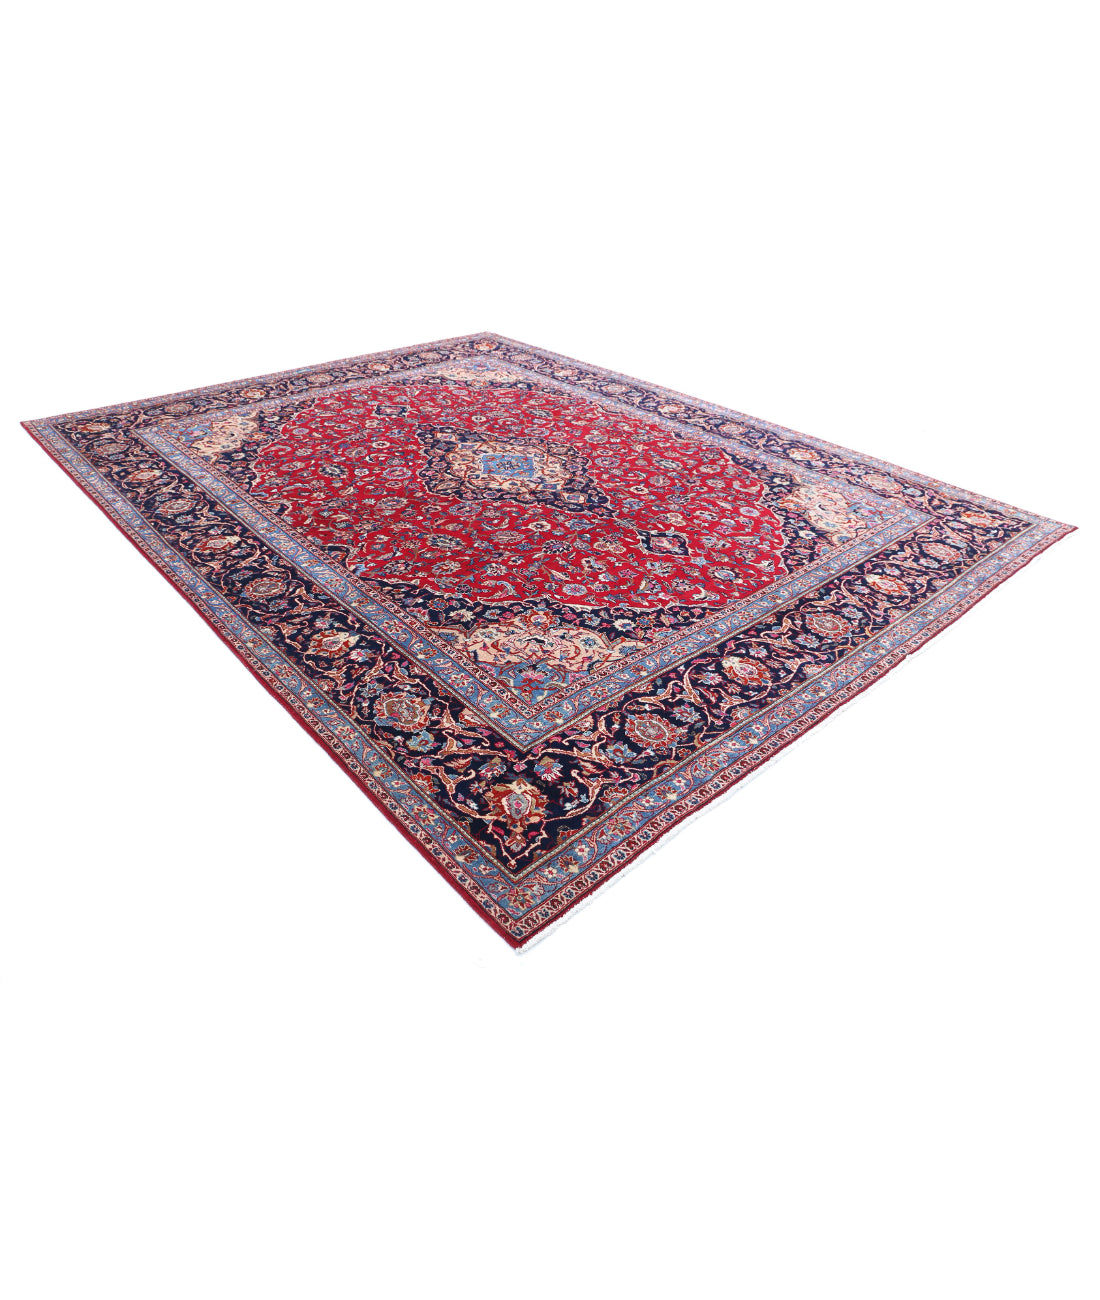 Hand Knotted Persian Mashad Wool Rug - 9'8'' x 12'6'' 9'8'' x 12'6'' (290 X 375) / Red / Black